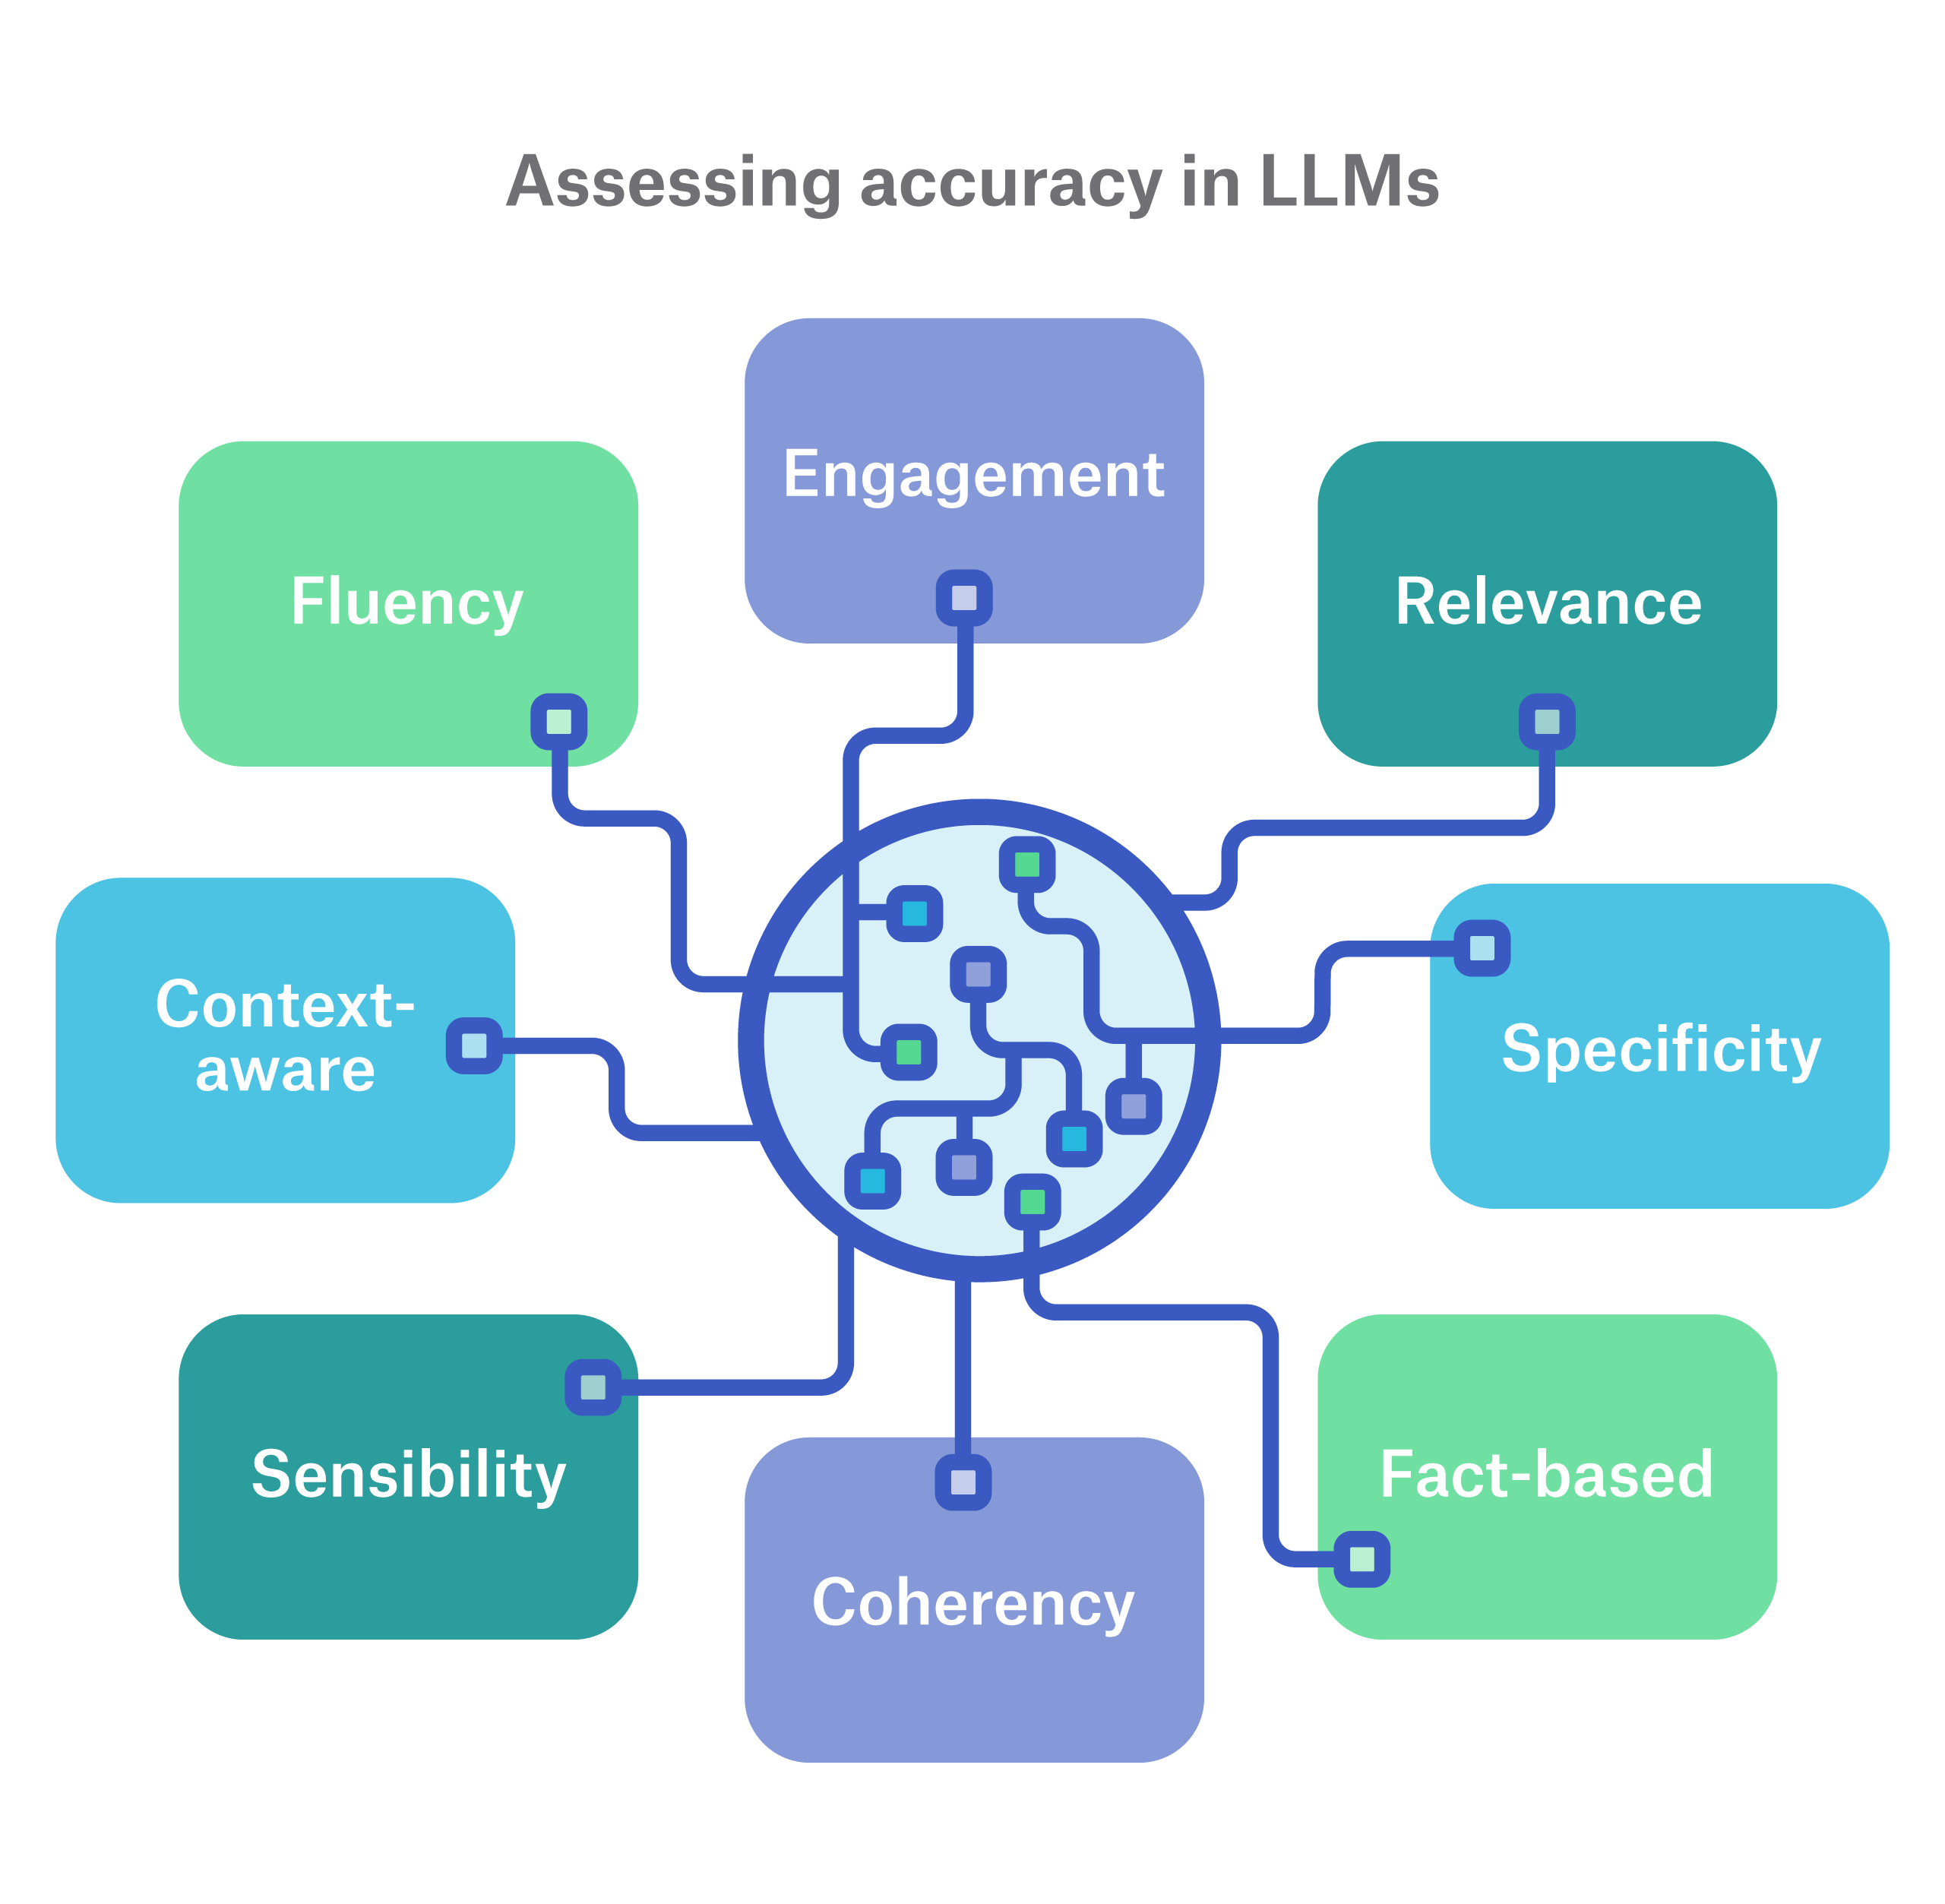 Graphic image of assessing accuracy in LLMs